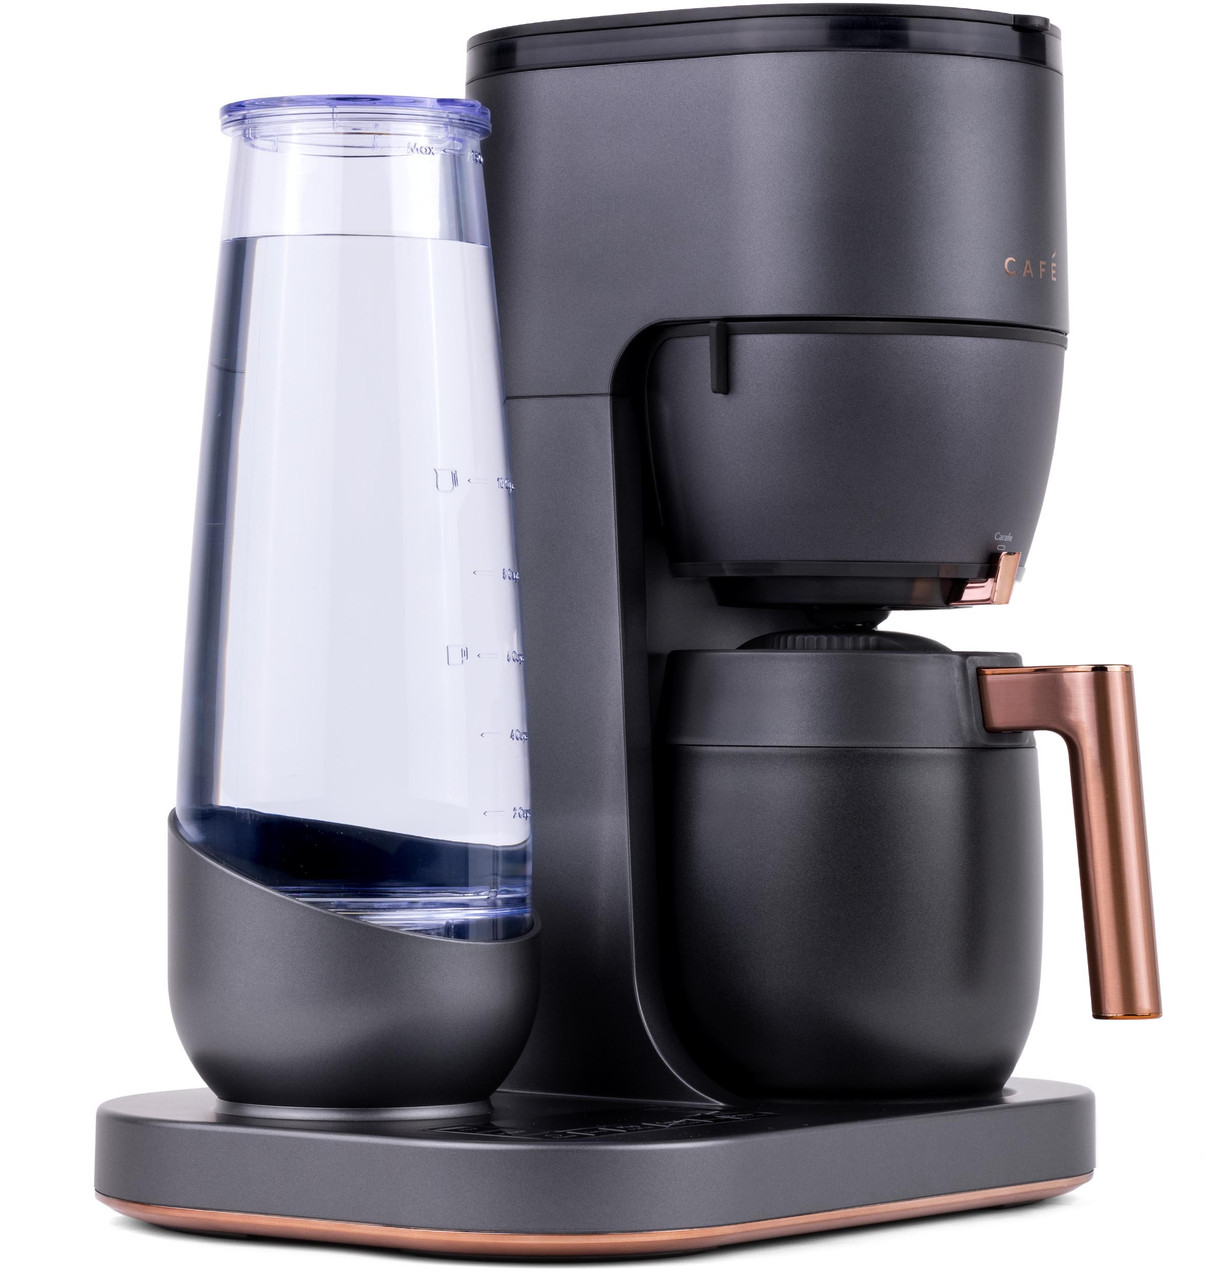 Café™ Specialty Grind and Brew Coffee Maker with Thermal Carafe -  C7CGAAS2TS3 - Cafe Appliances